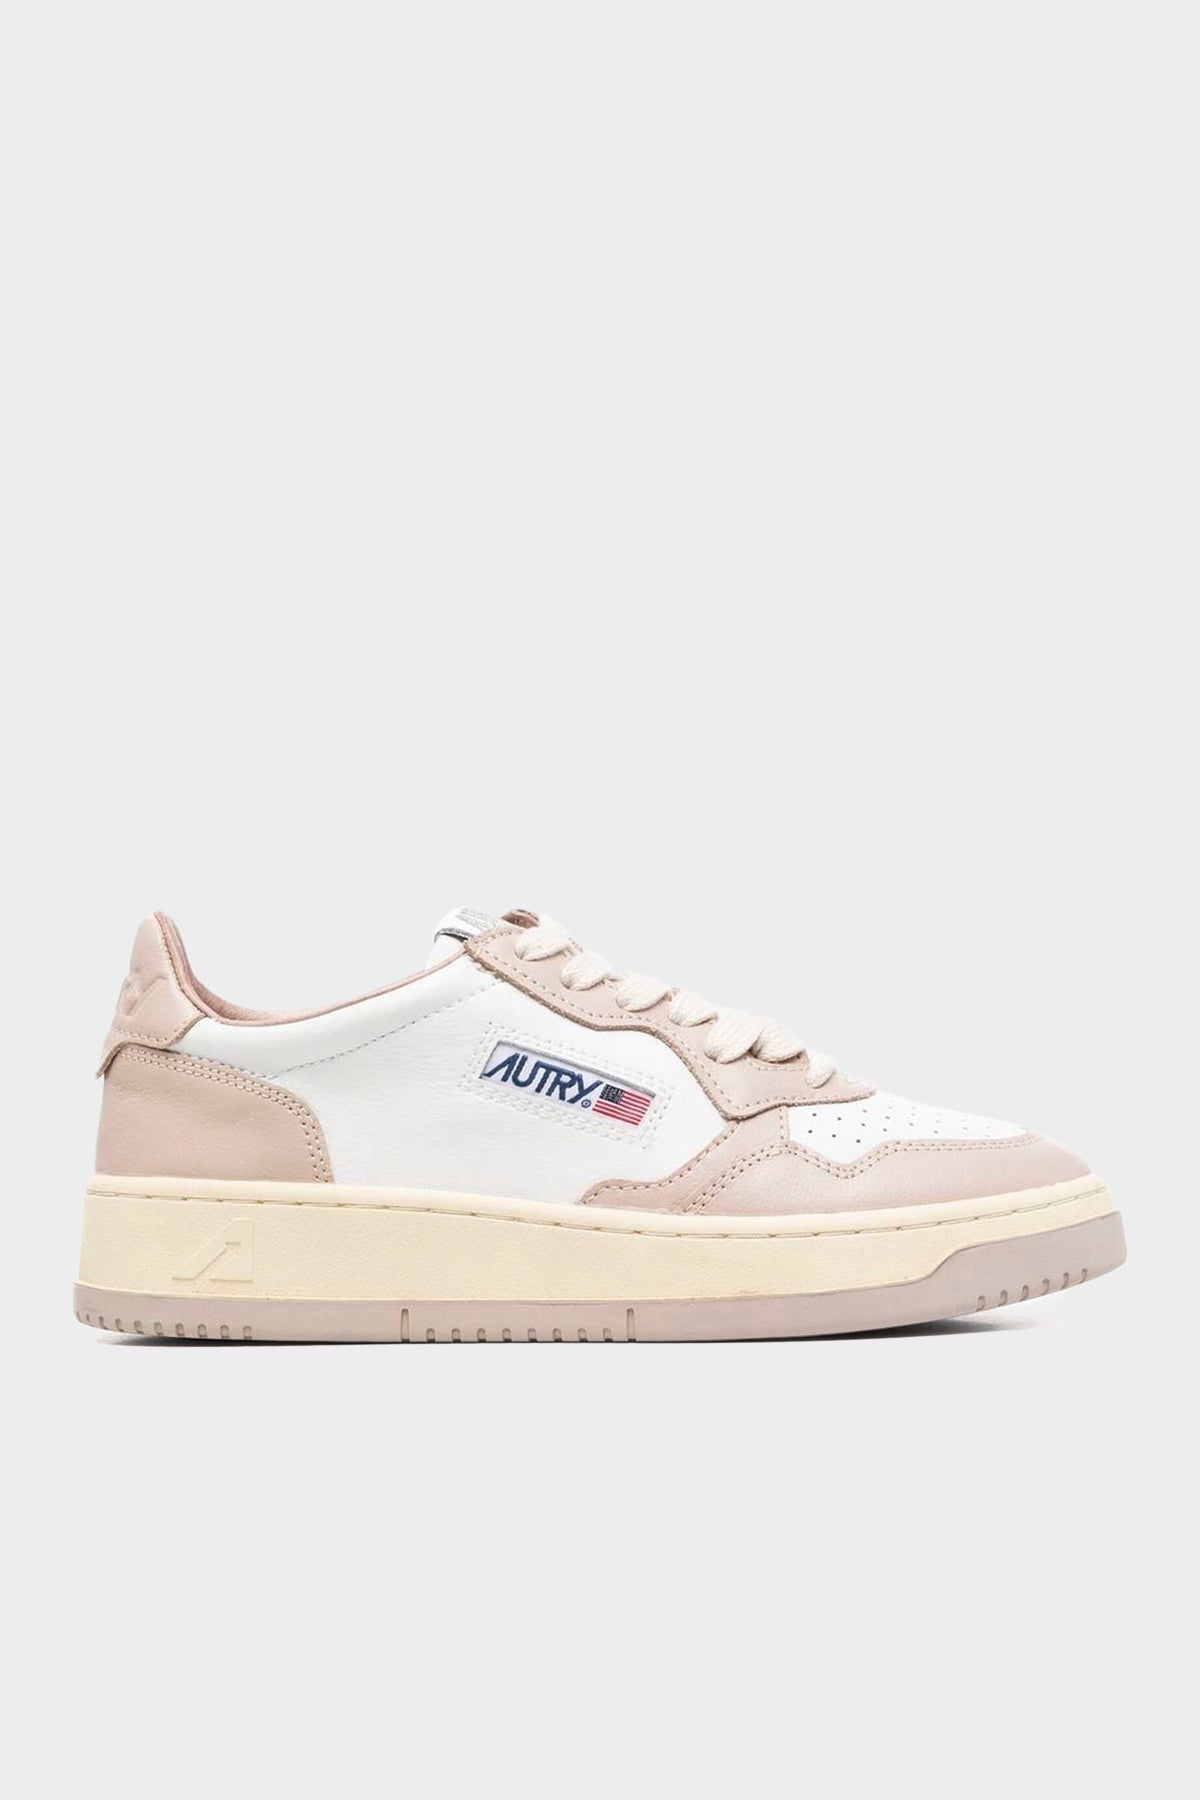 Two-Tone Medalist Low Leather Sneaker in White and Mushroom - shop-olivia.com